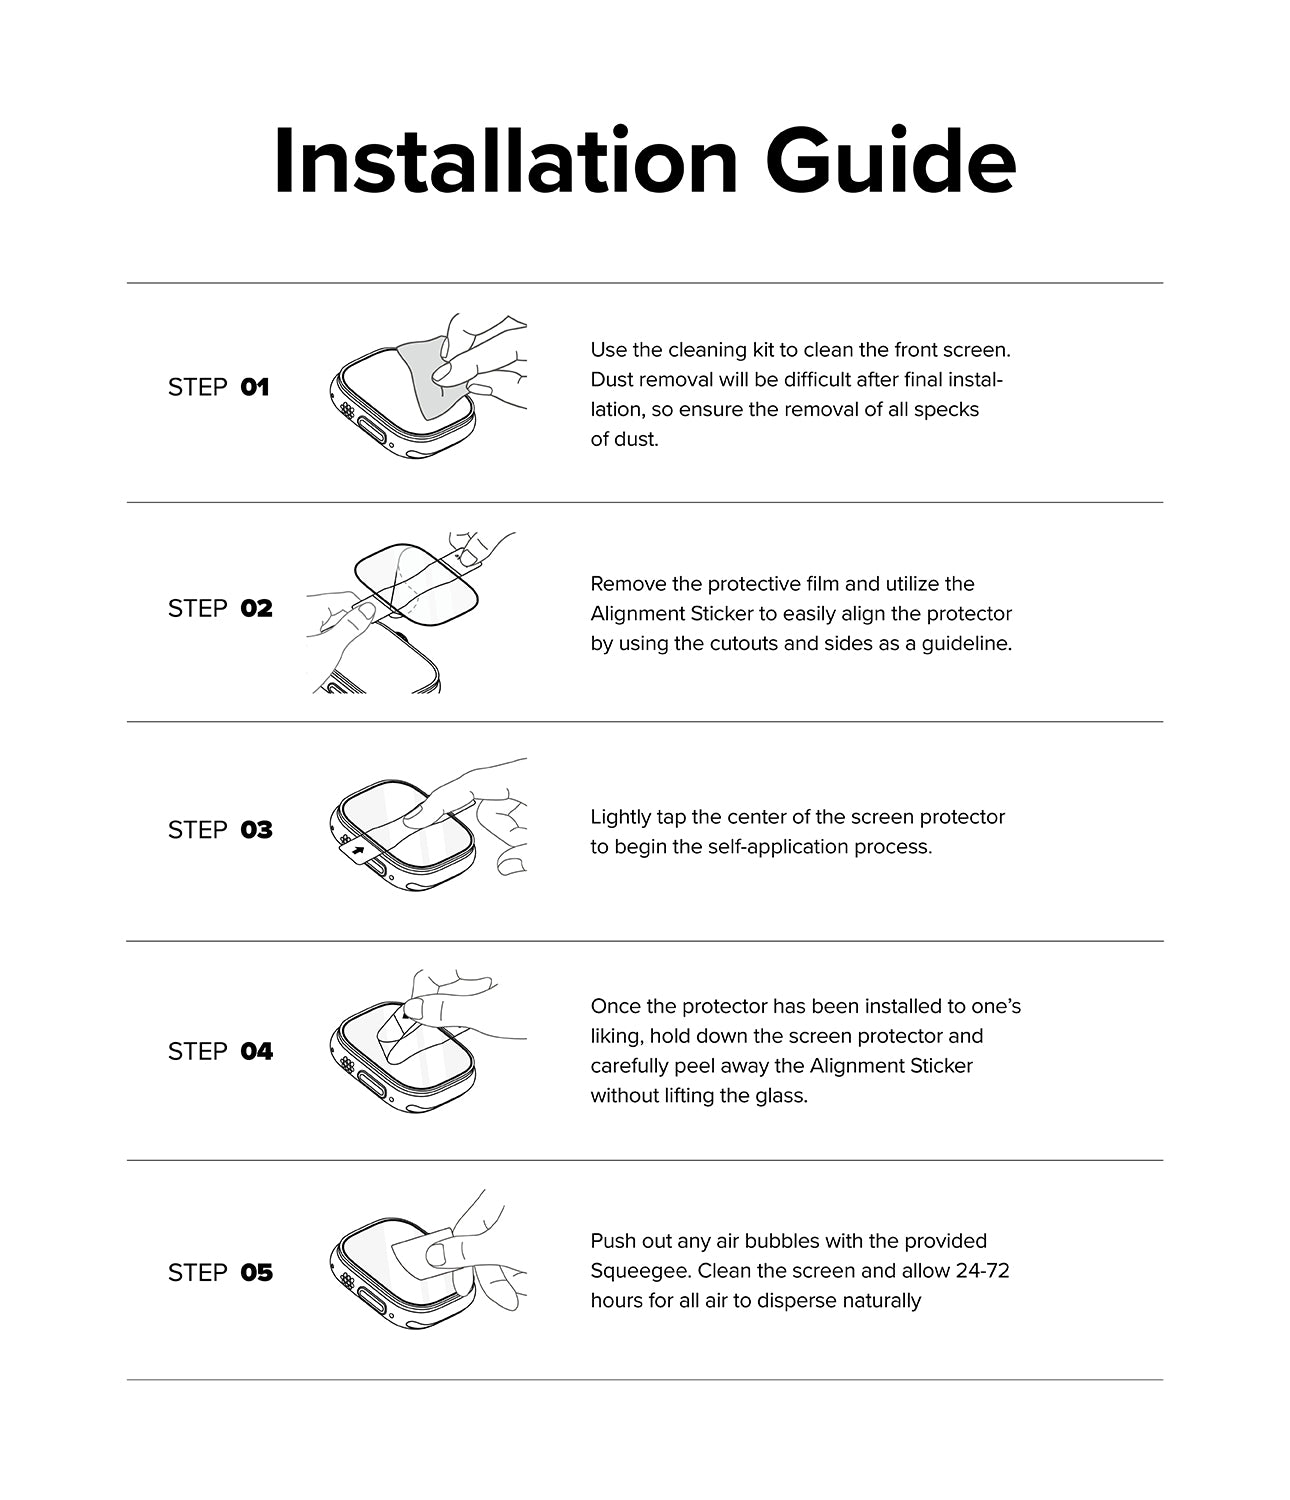 Installation Guide - Step 01. Use the cleaning kit to clean the front screen. Dust removal will be difficult after final installation, so ensure the removal of all specks of dust. Step 02 -...